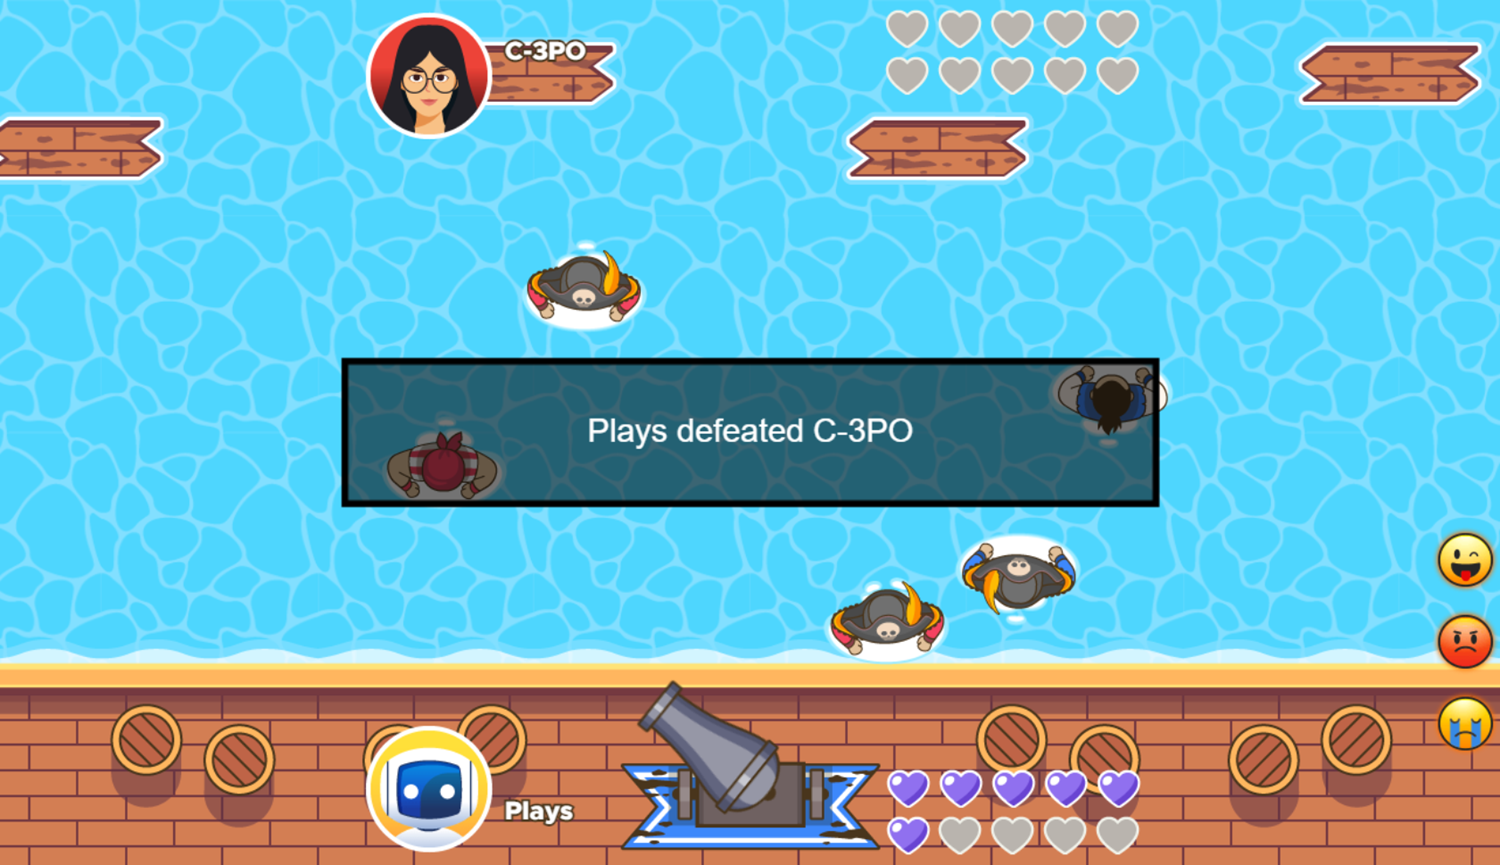 Board The Ship With Buddies Game Enemy Defeated Screenshot.